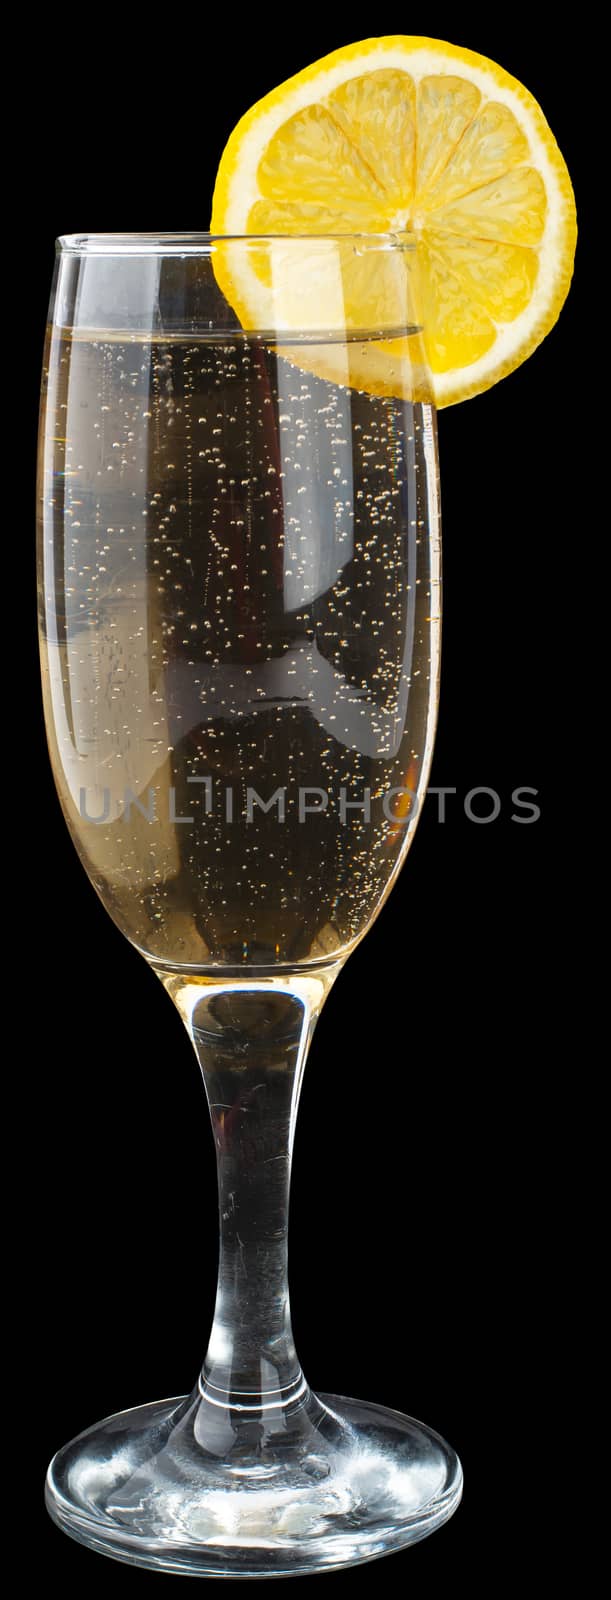 Champagne glass with lemon slice by cherezoff